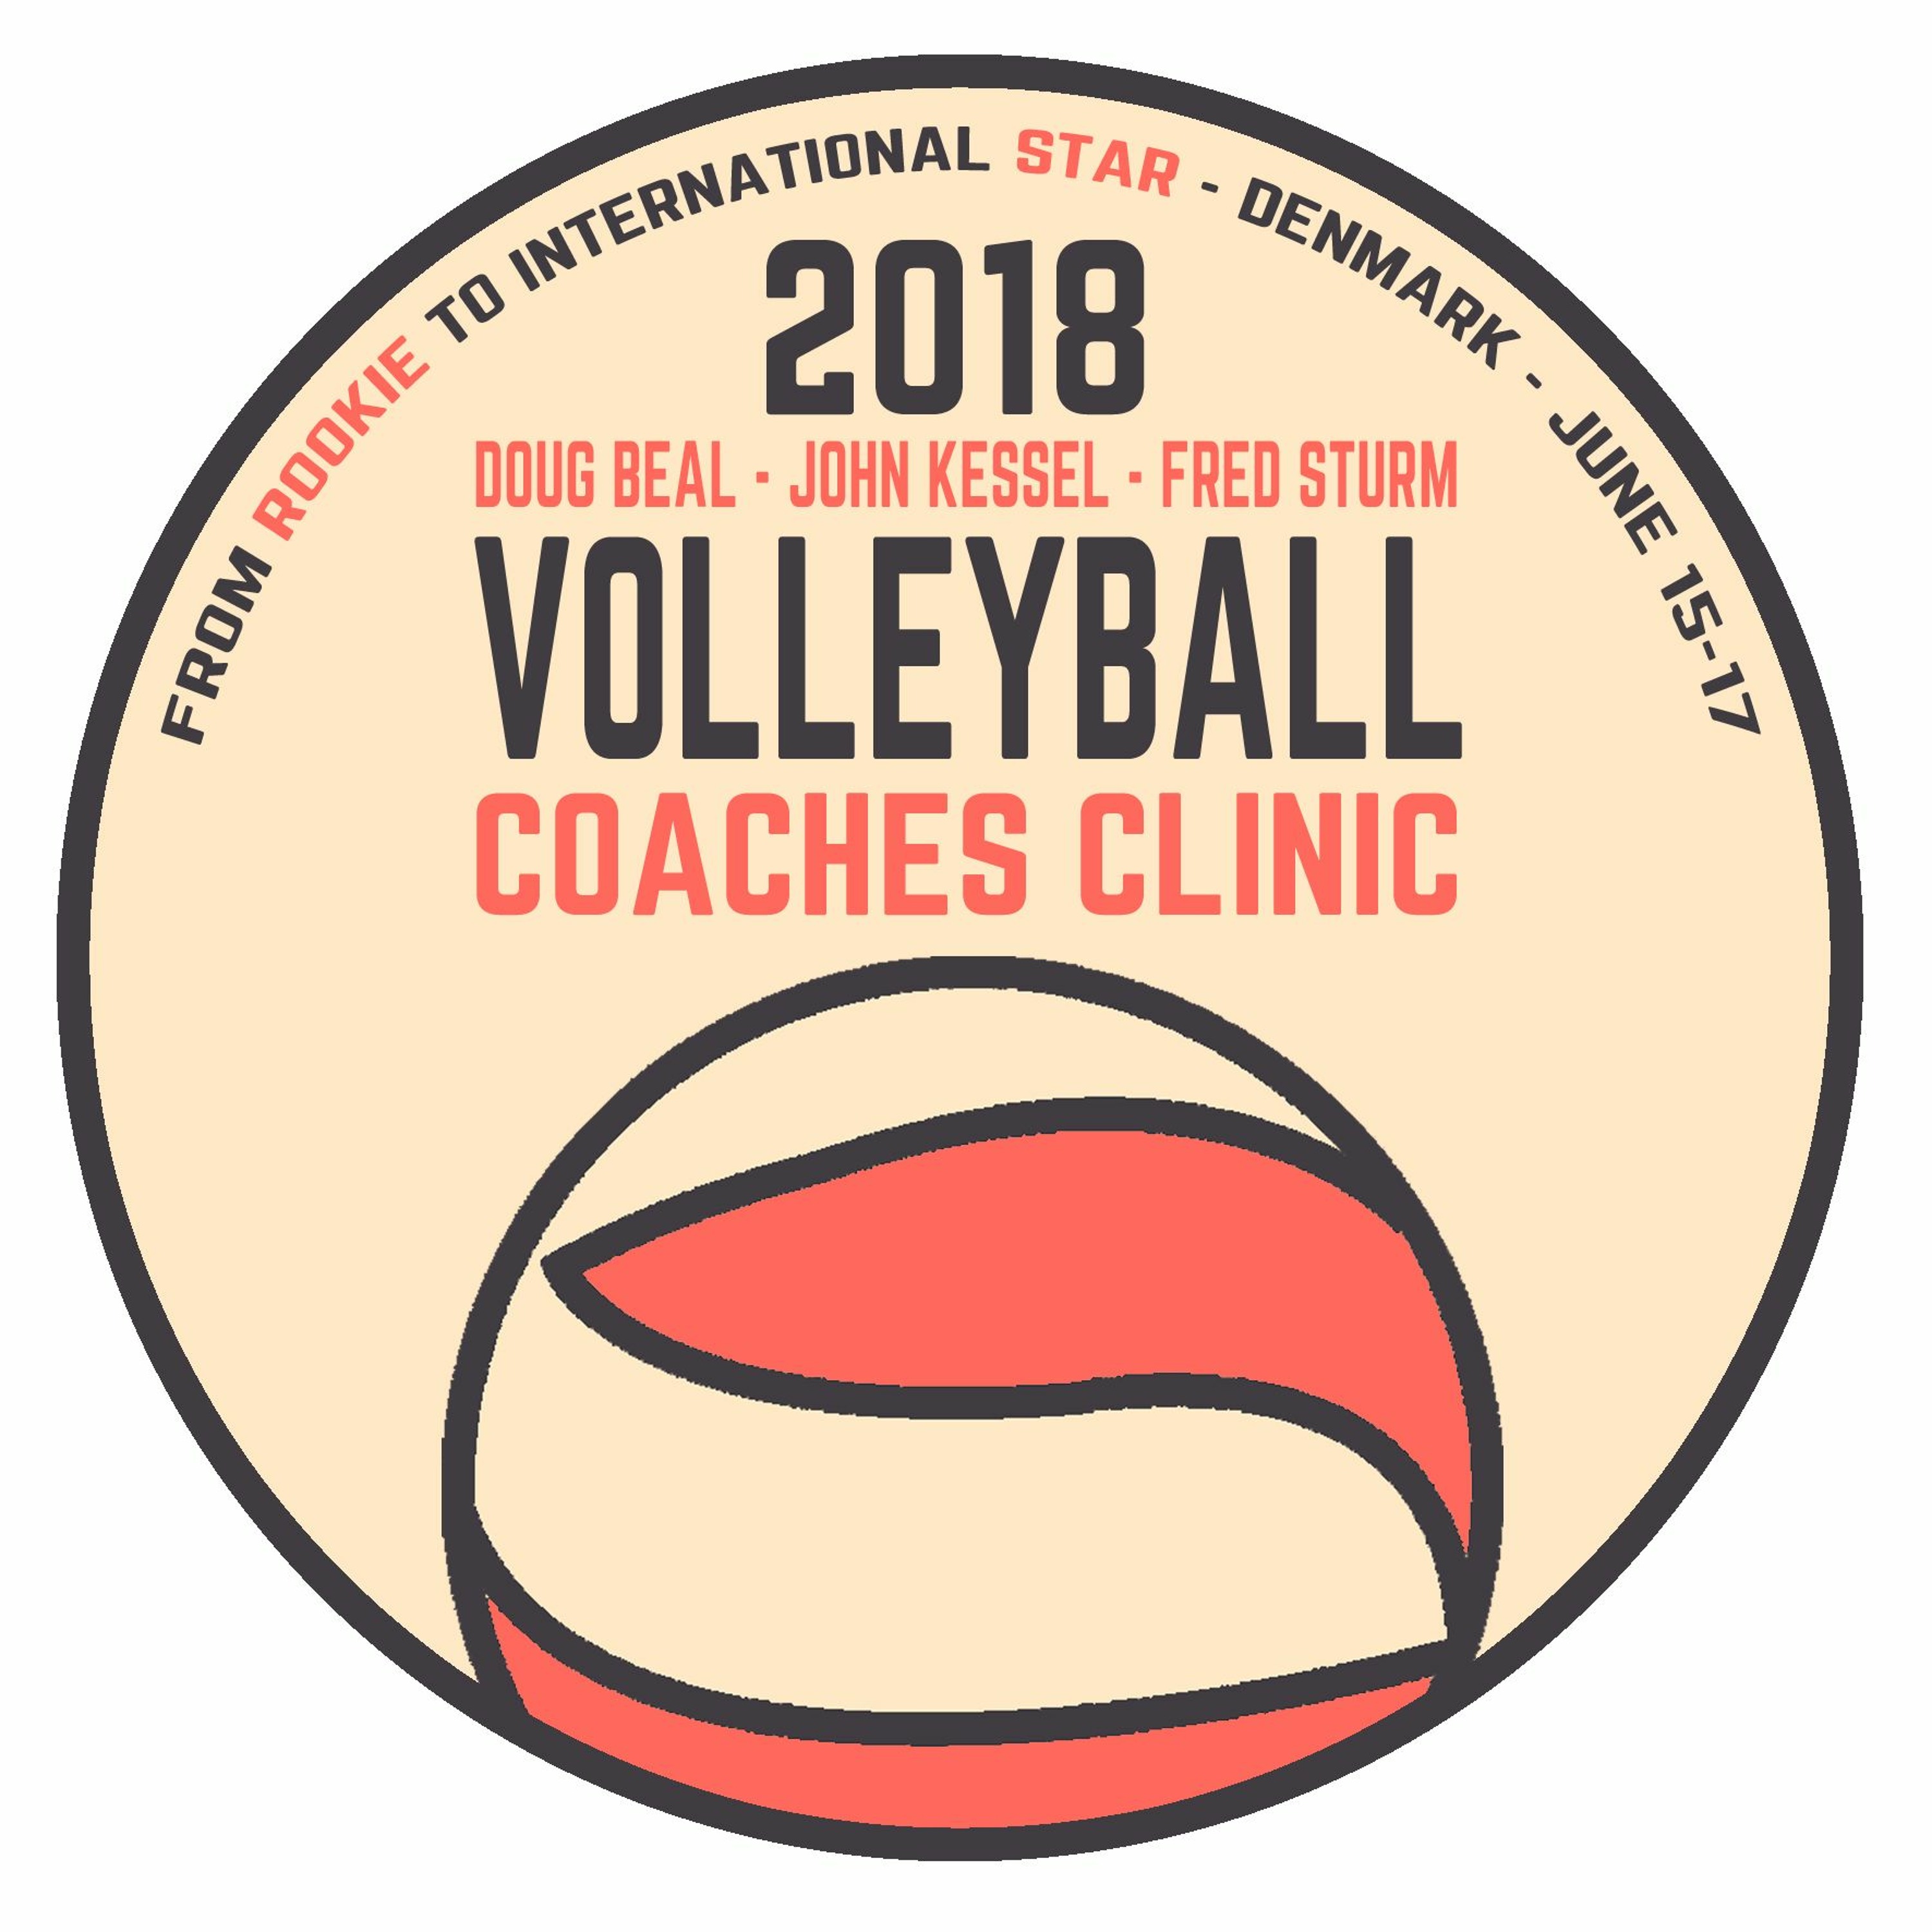 All level Coaches Clinic in Denmark June 15-17, 2018